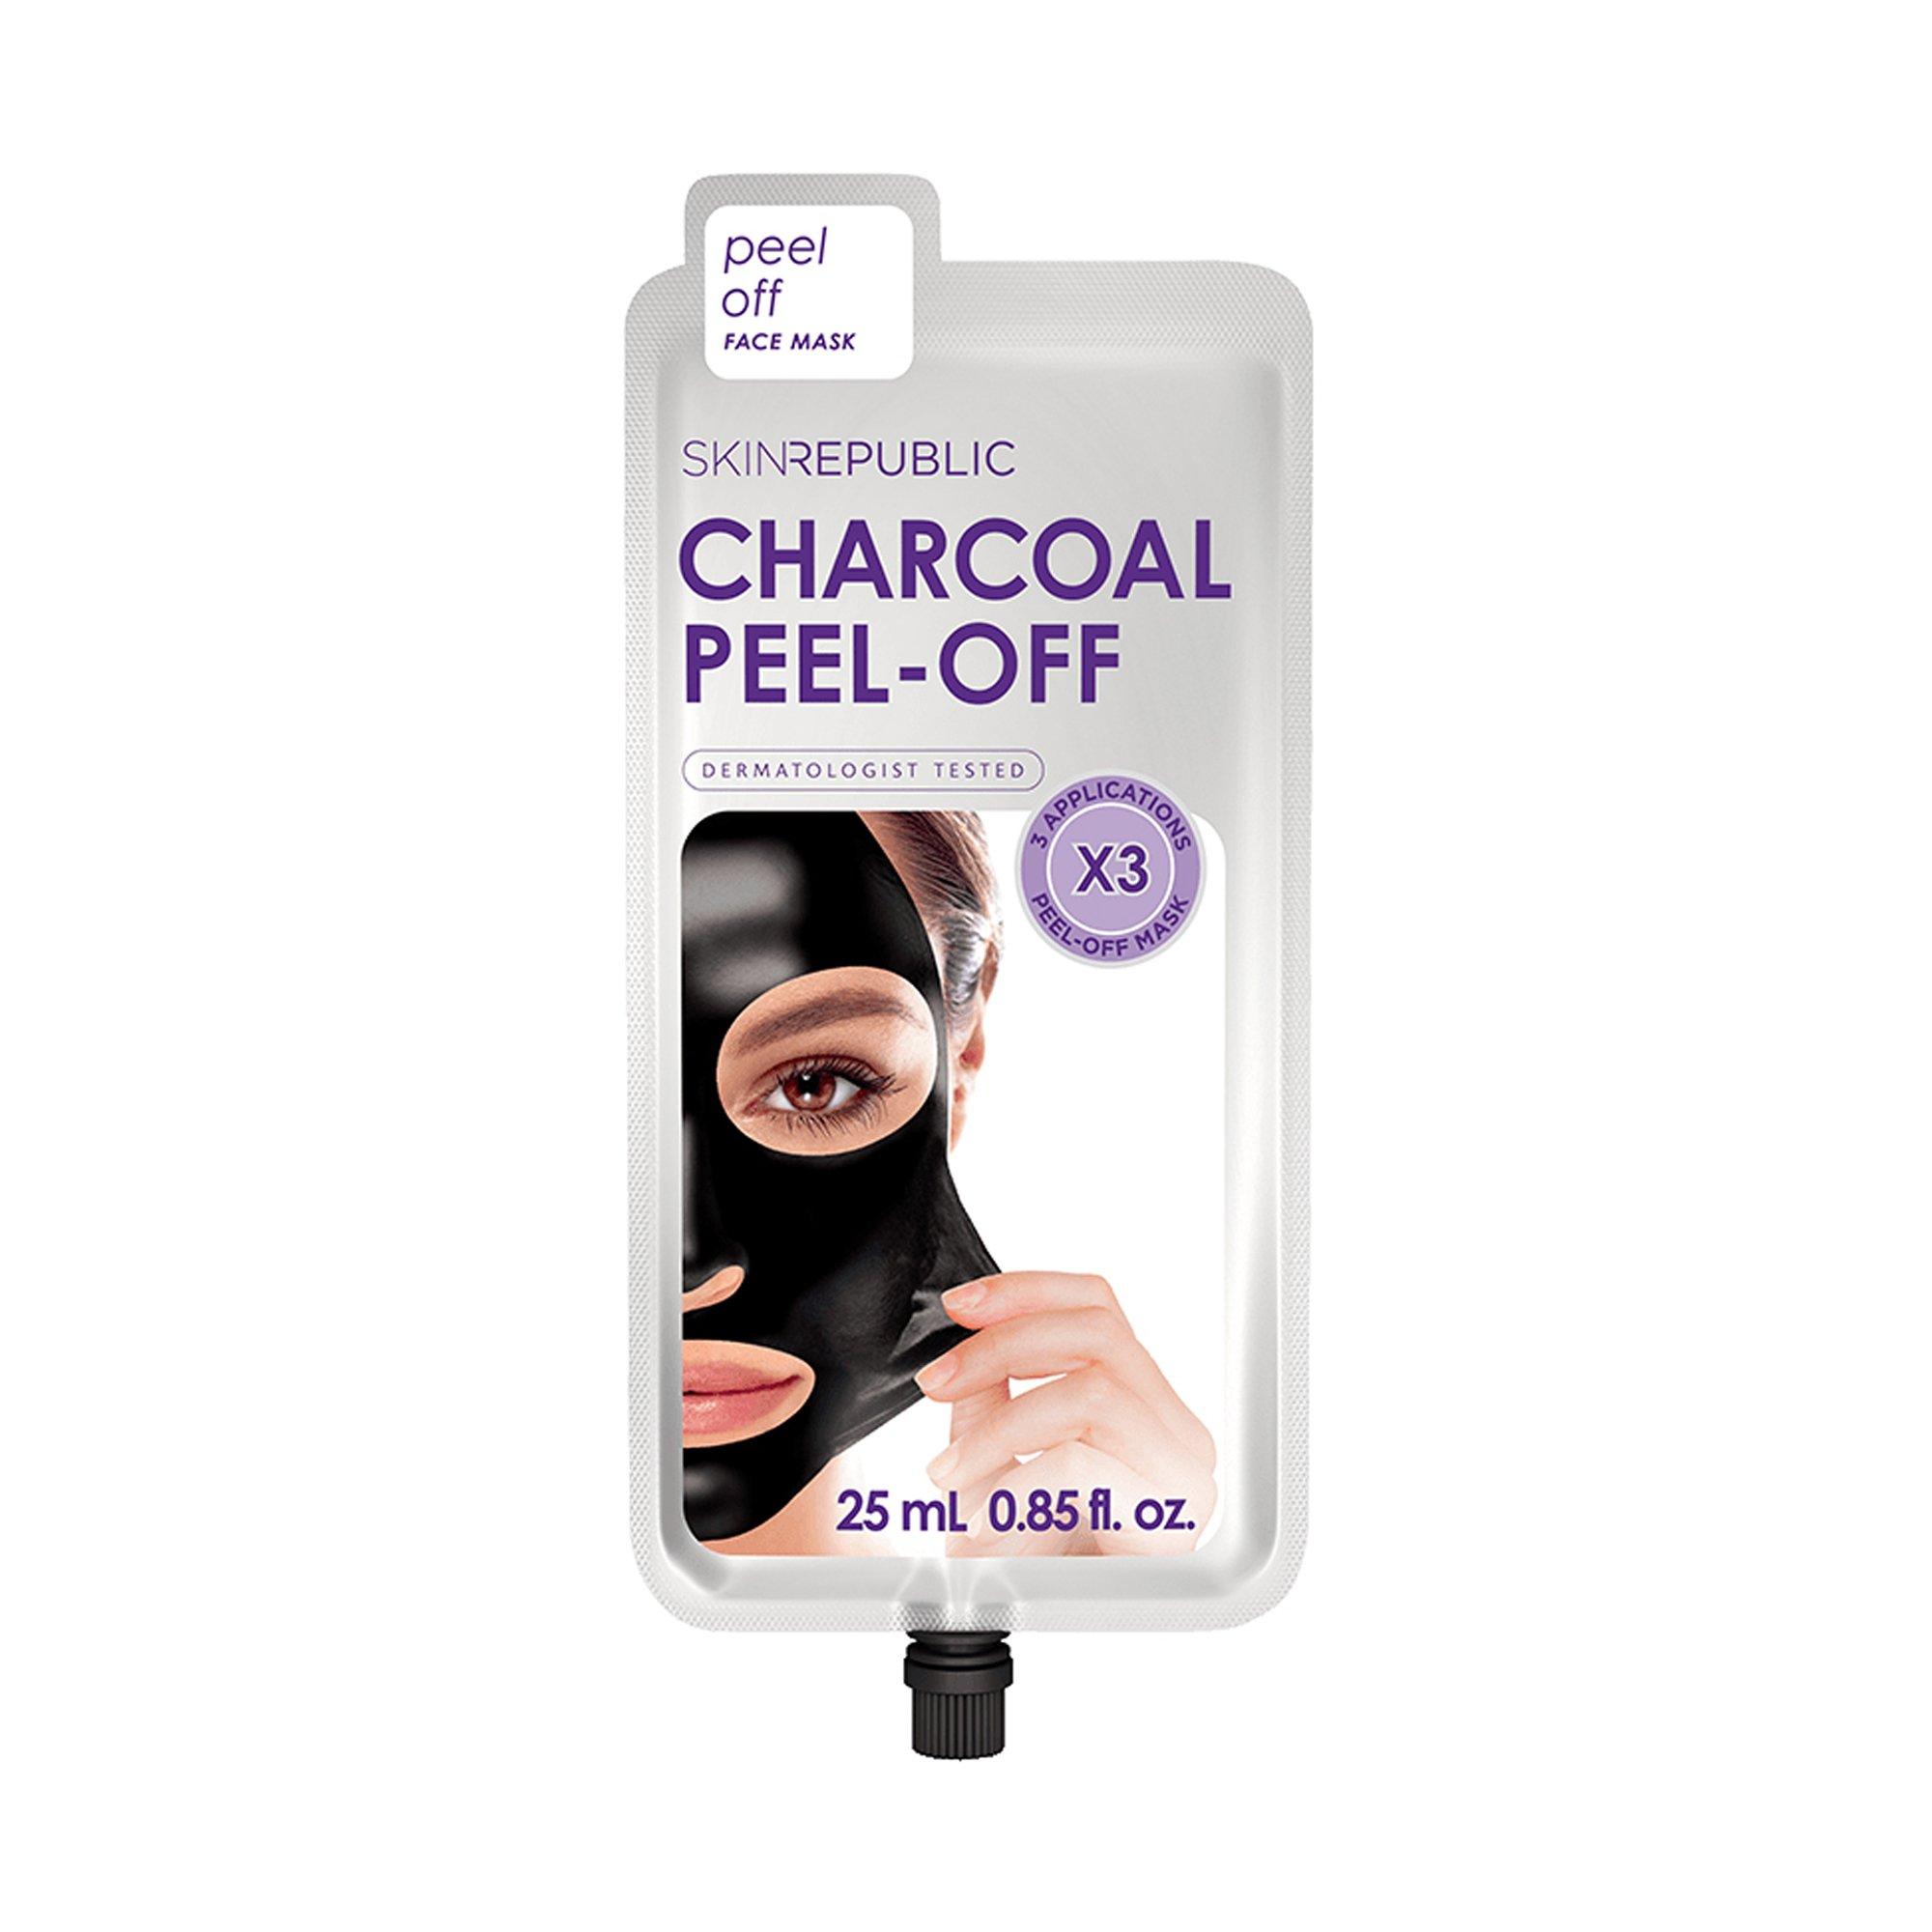 Image of Skin republic Charcoal Peel-Off Face Mask - 25ml